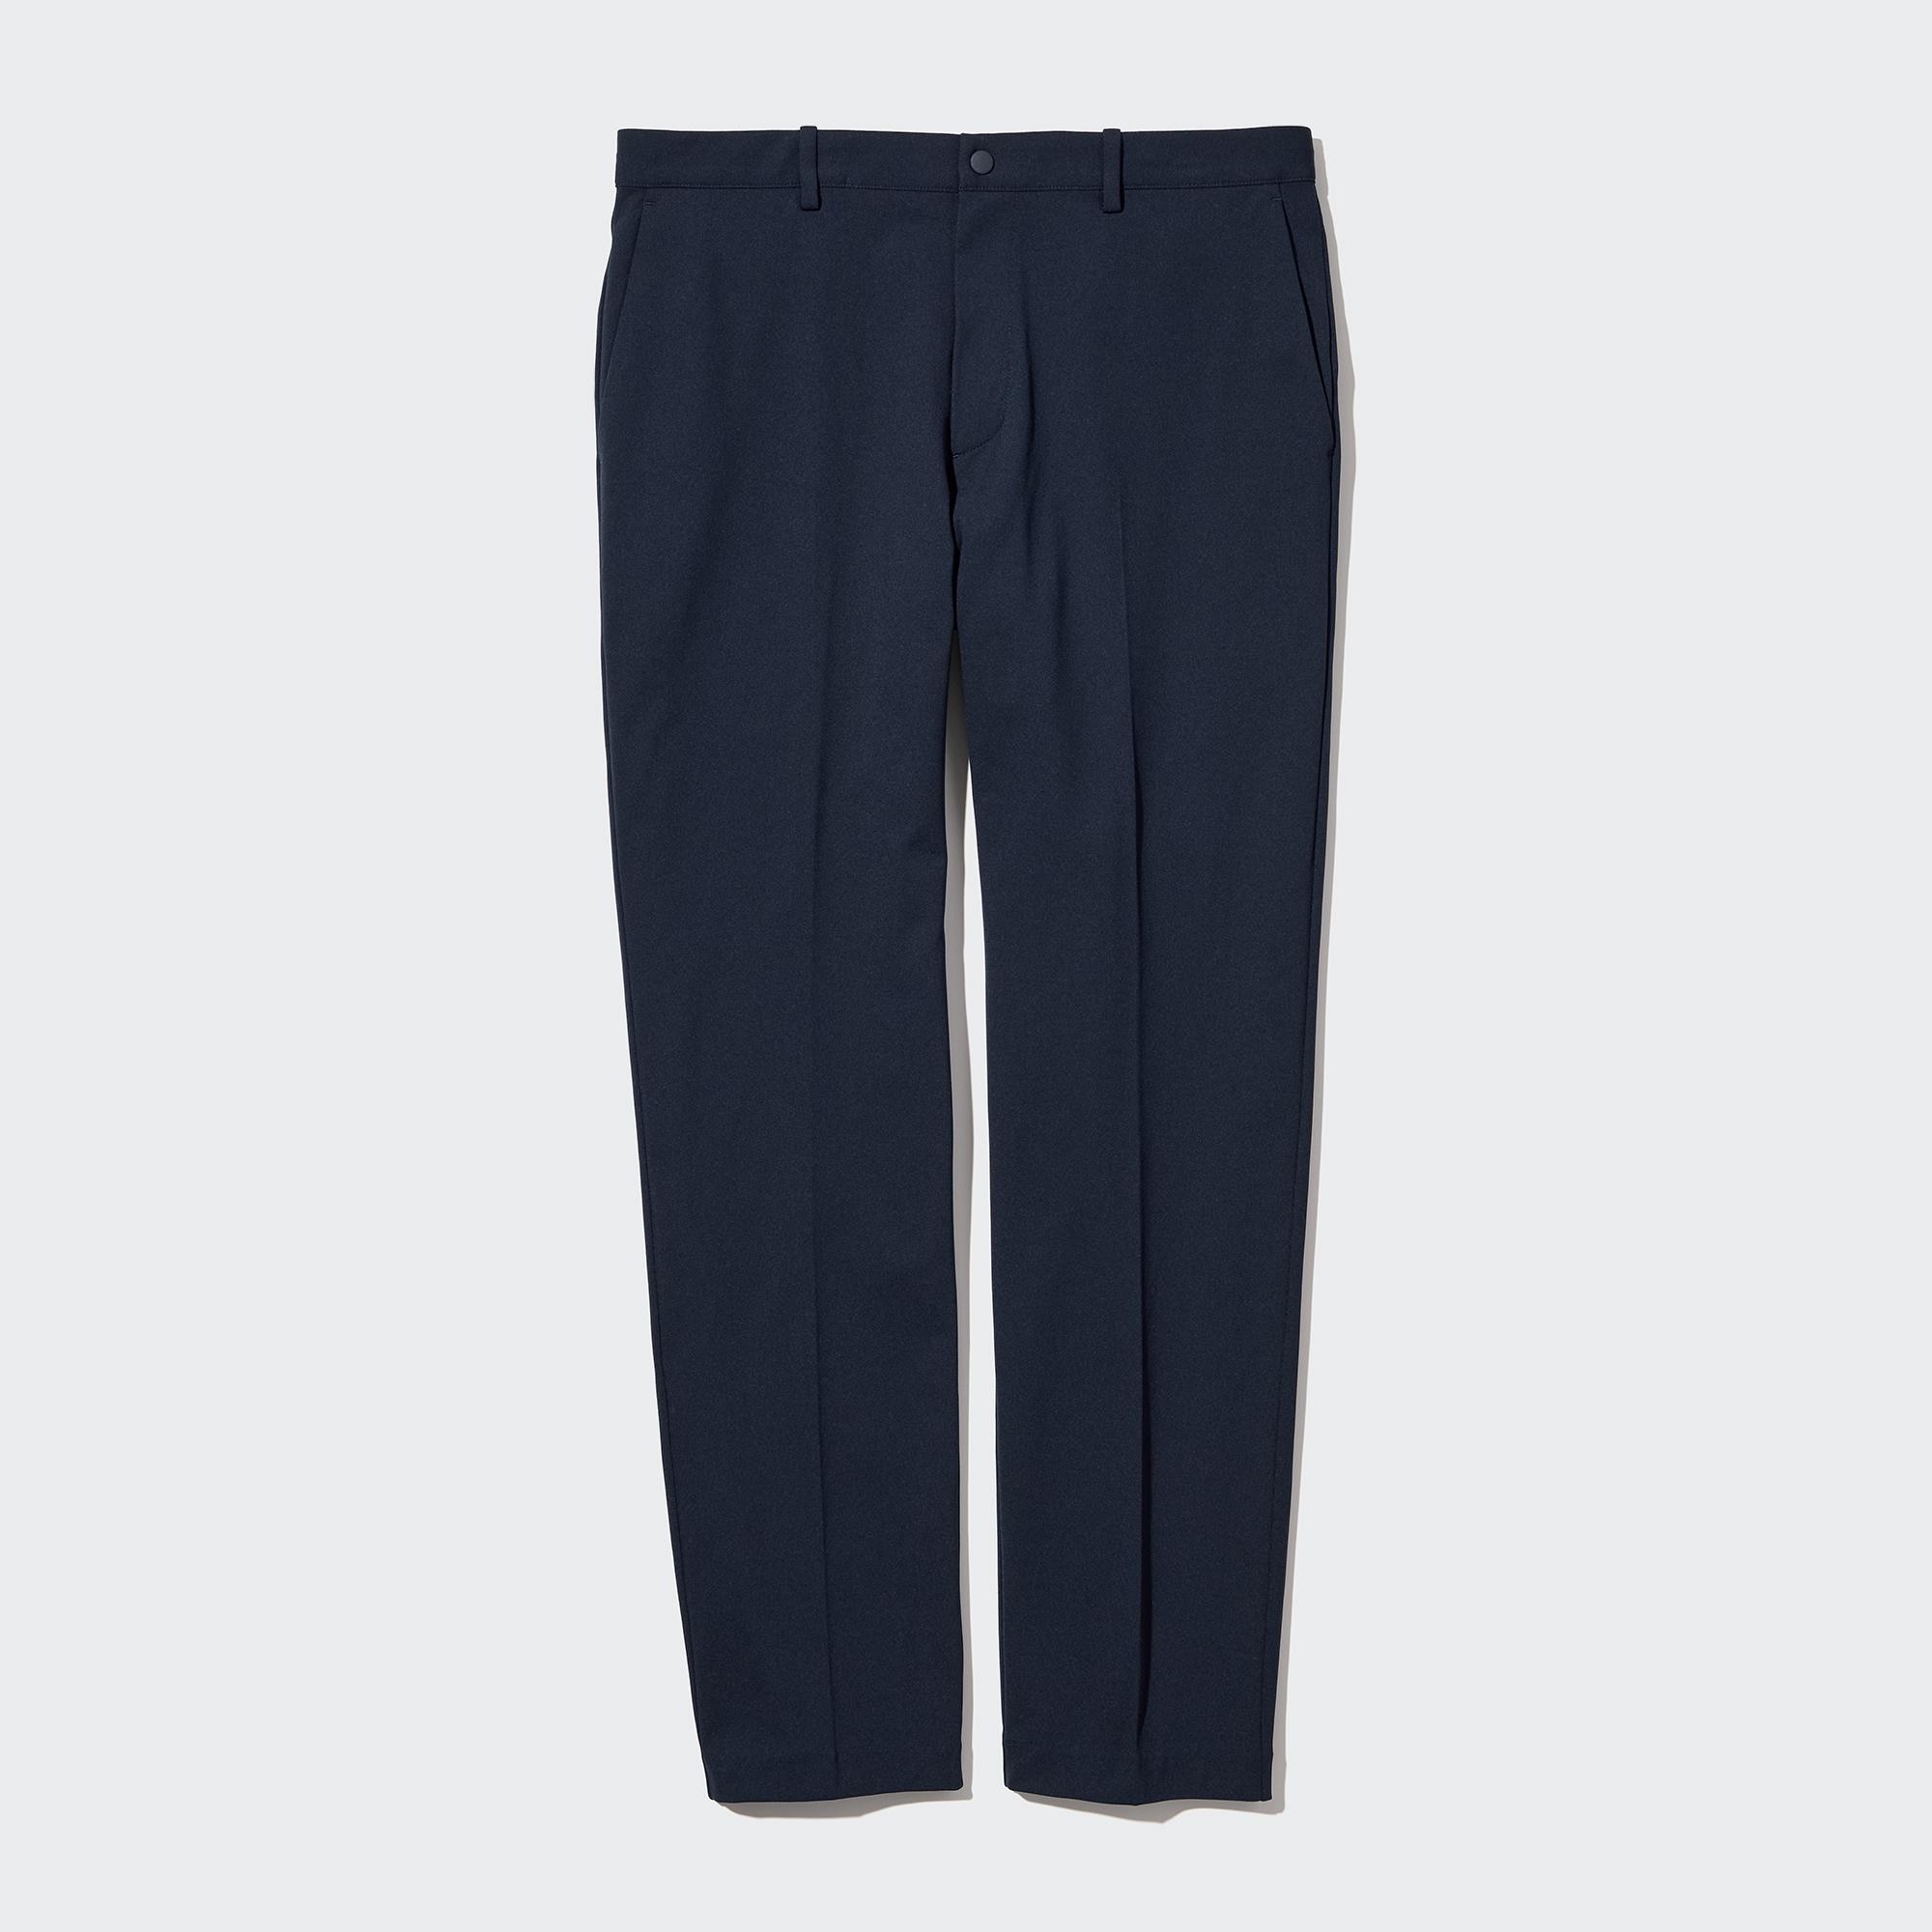 Smart Ankle Pants (Ultra Stretch, Tall)